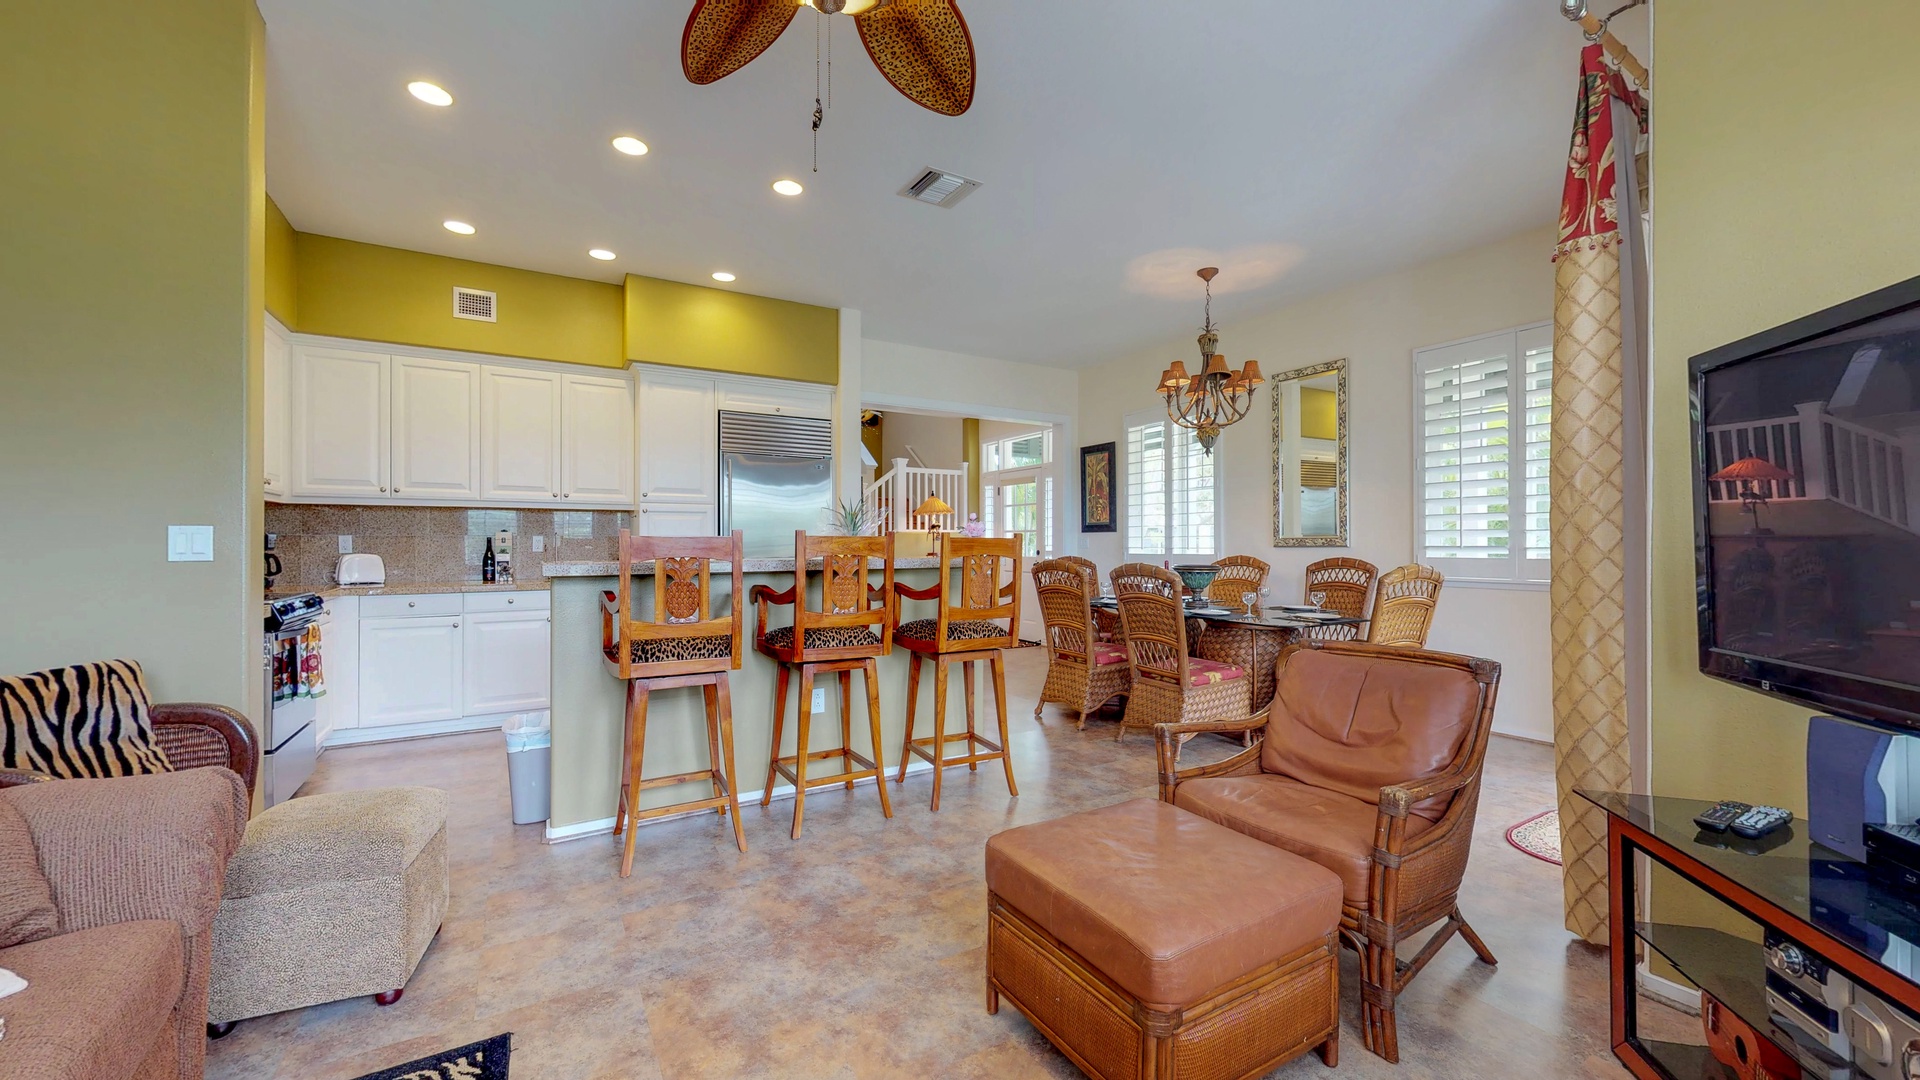 Kapolei Vacation Rentals, Coconut Plantation 1080-1 - The open floor plan includes seating in the kitchen bar area and living and dining areas.